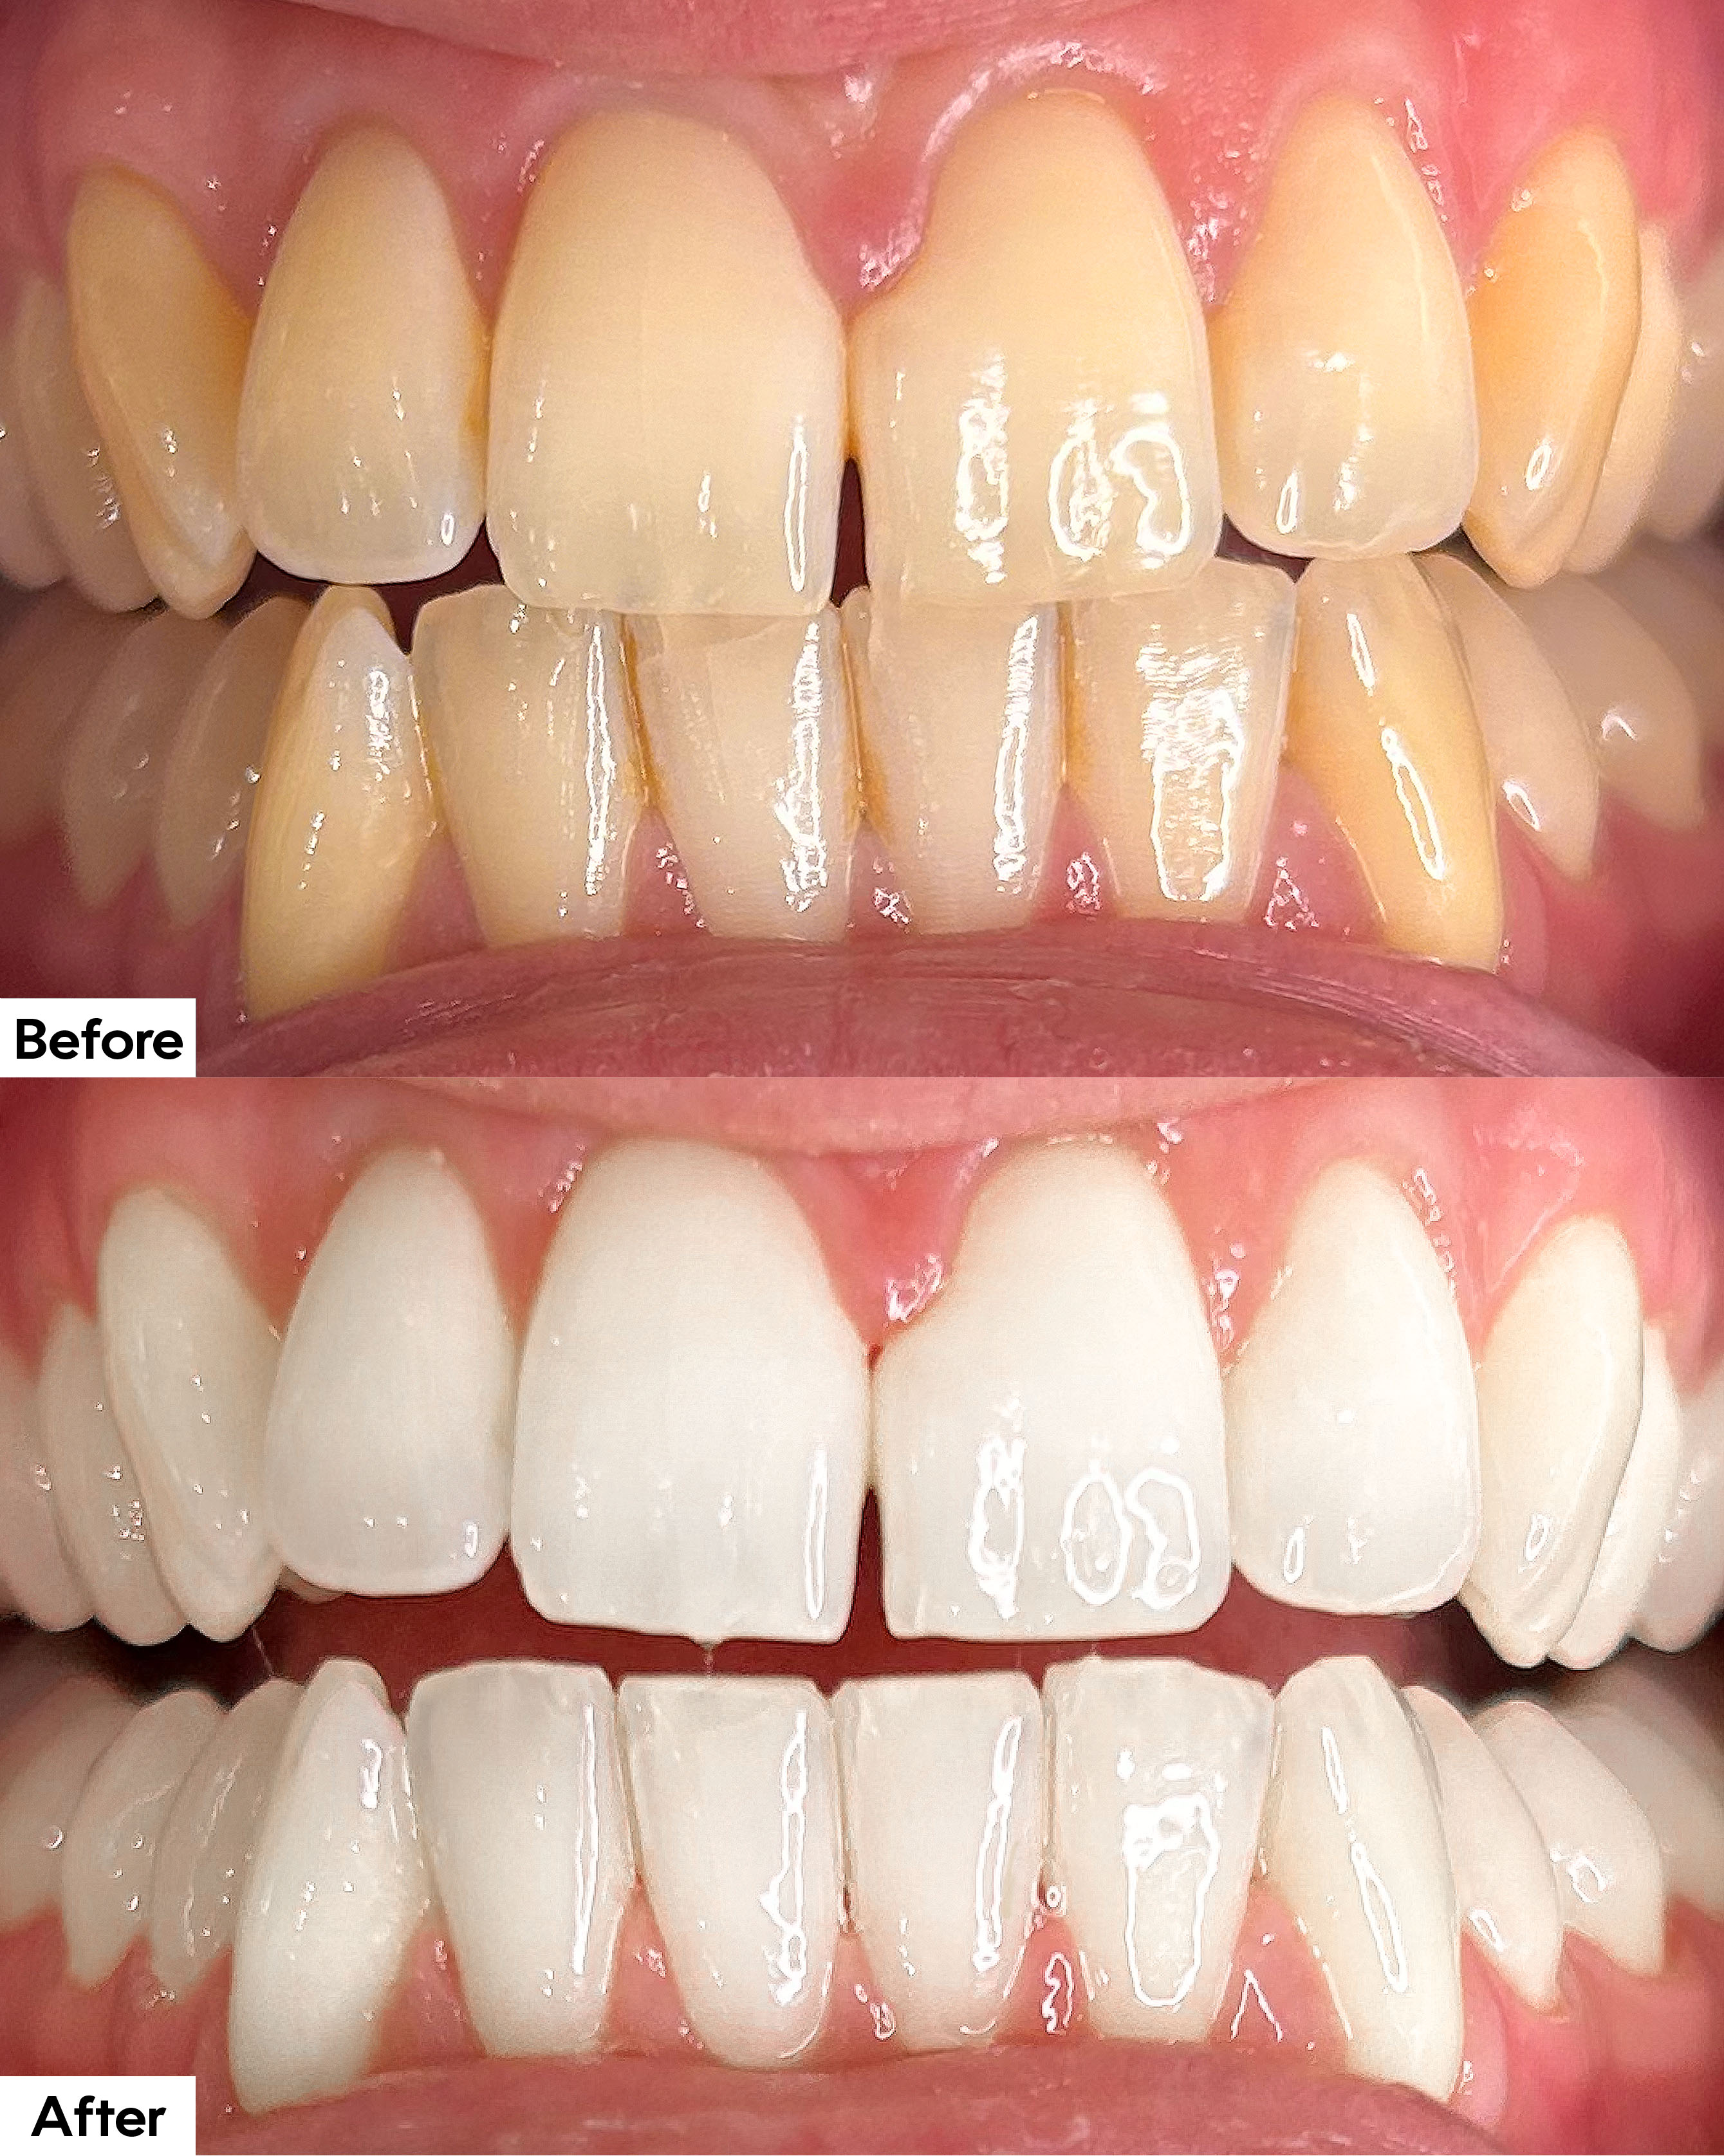 Boutique whitening before and after images